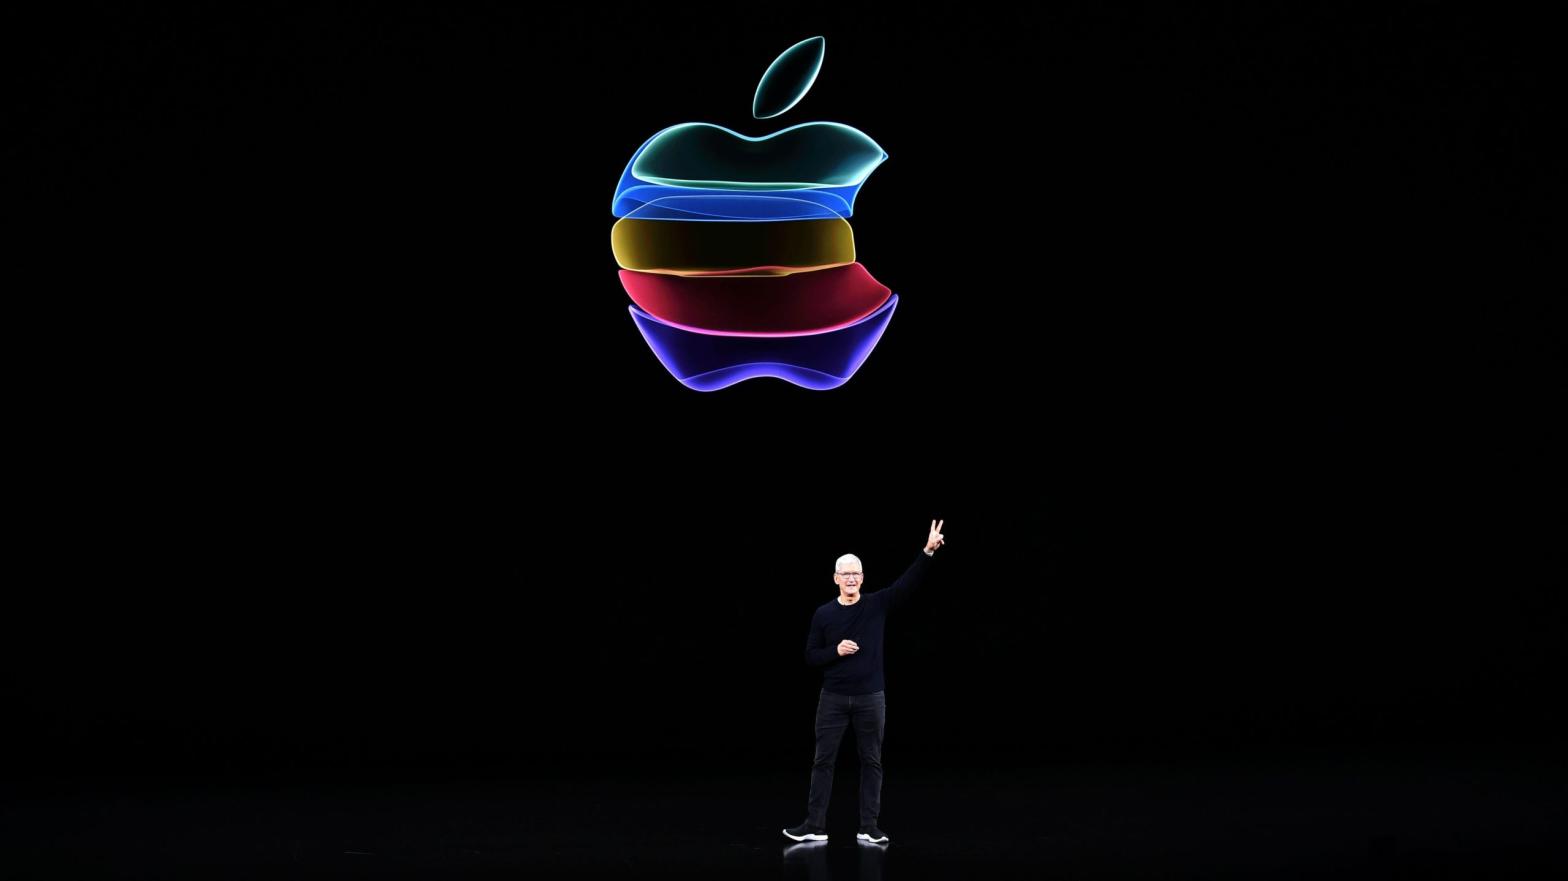 Apple CEO Tim Cook speaks onstage during a product launch event at Apple's headquarters in Cupertino, California on September 10, 2019.  (Photo: Josh Edelson / AFP, Getty Images)